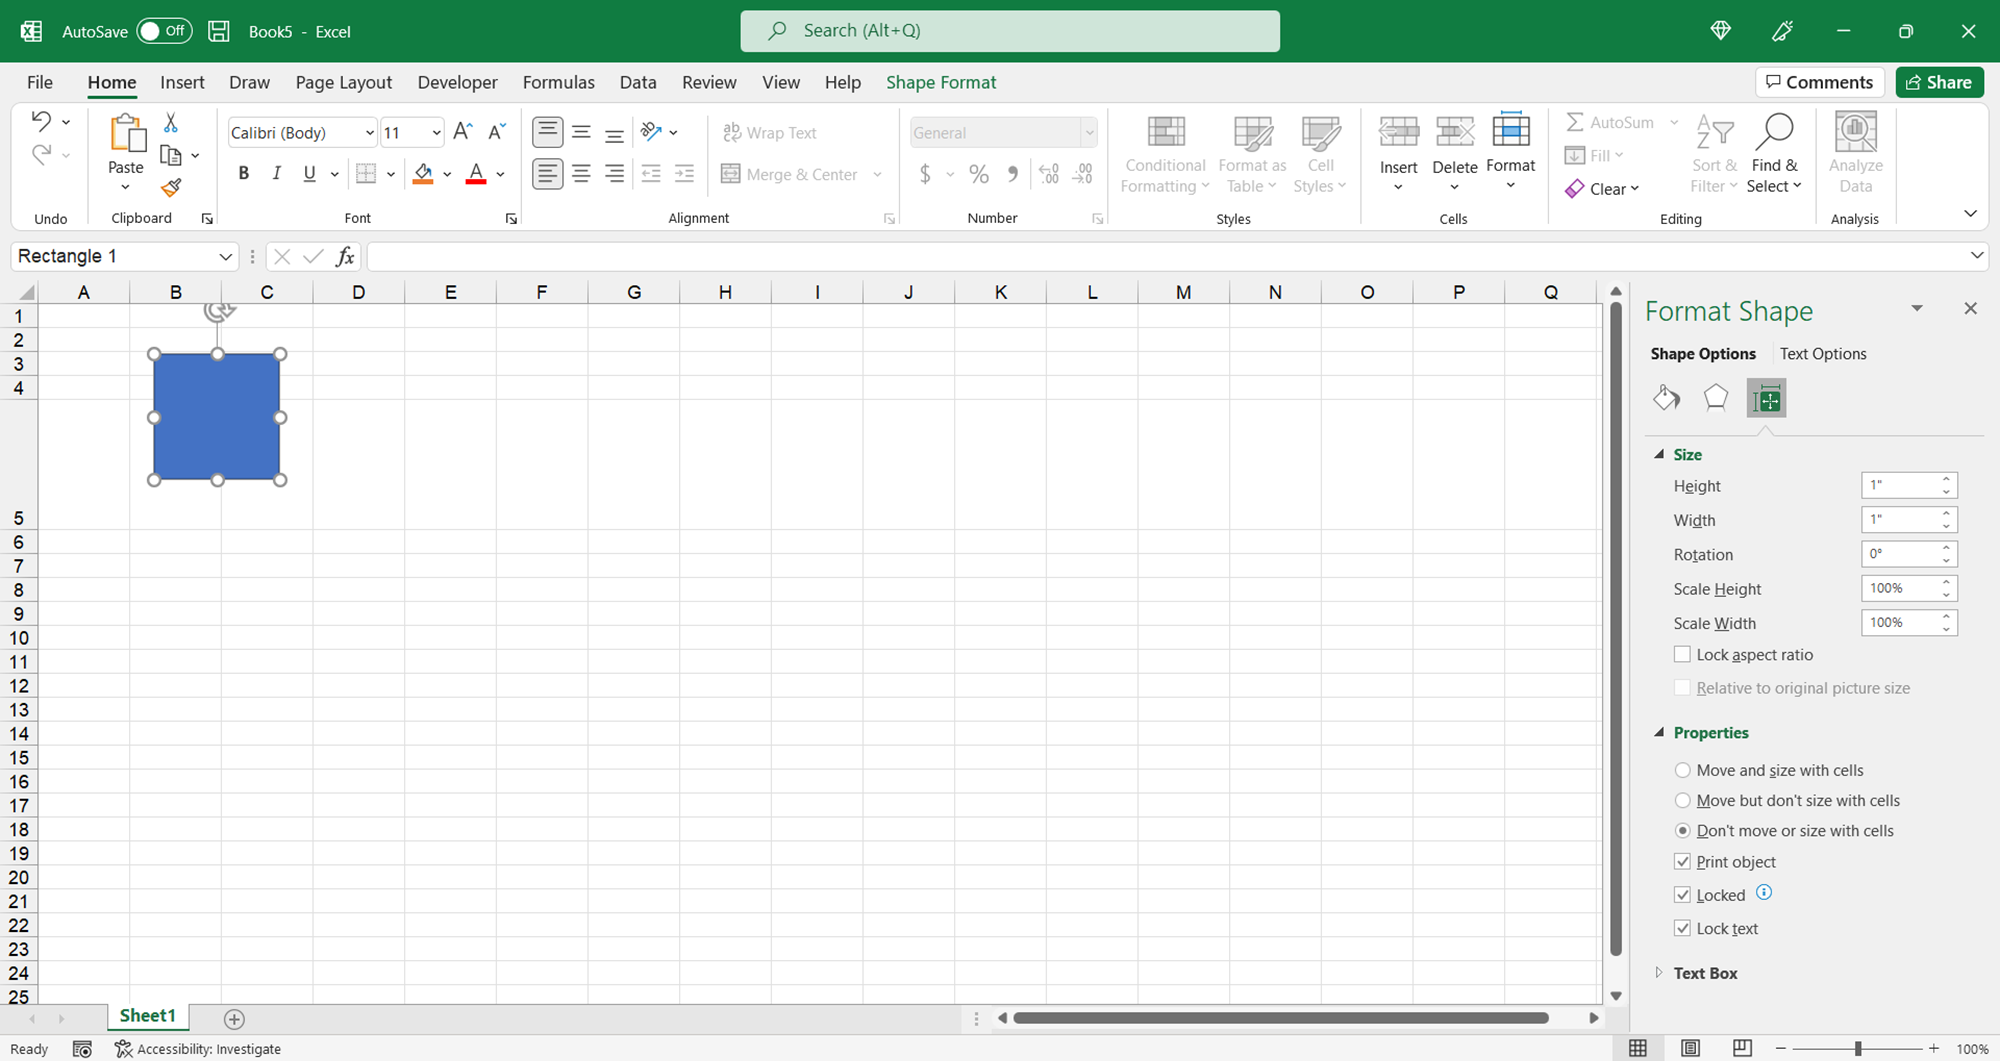 How to keep the size and position of an object in Excel